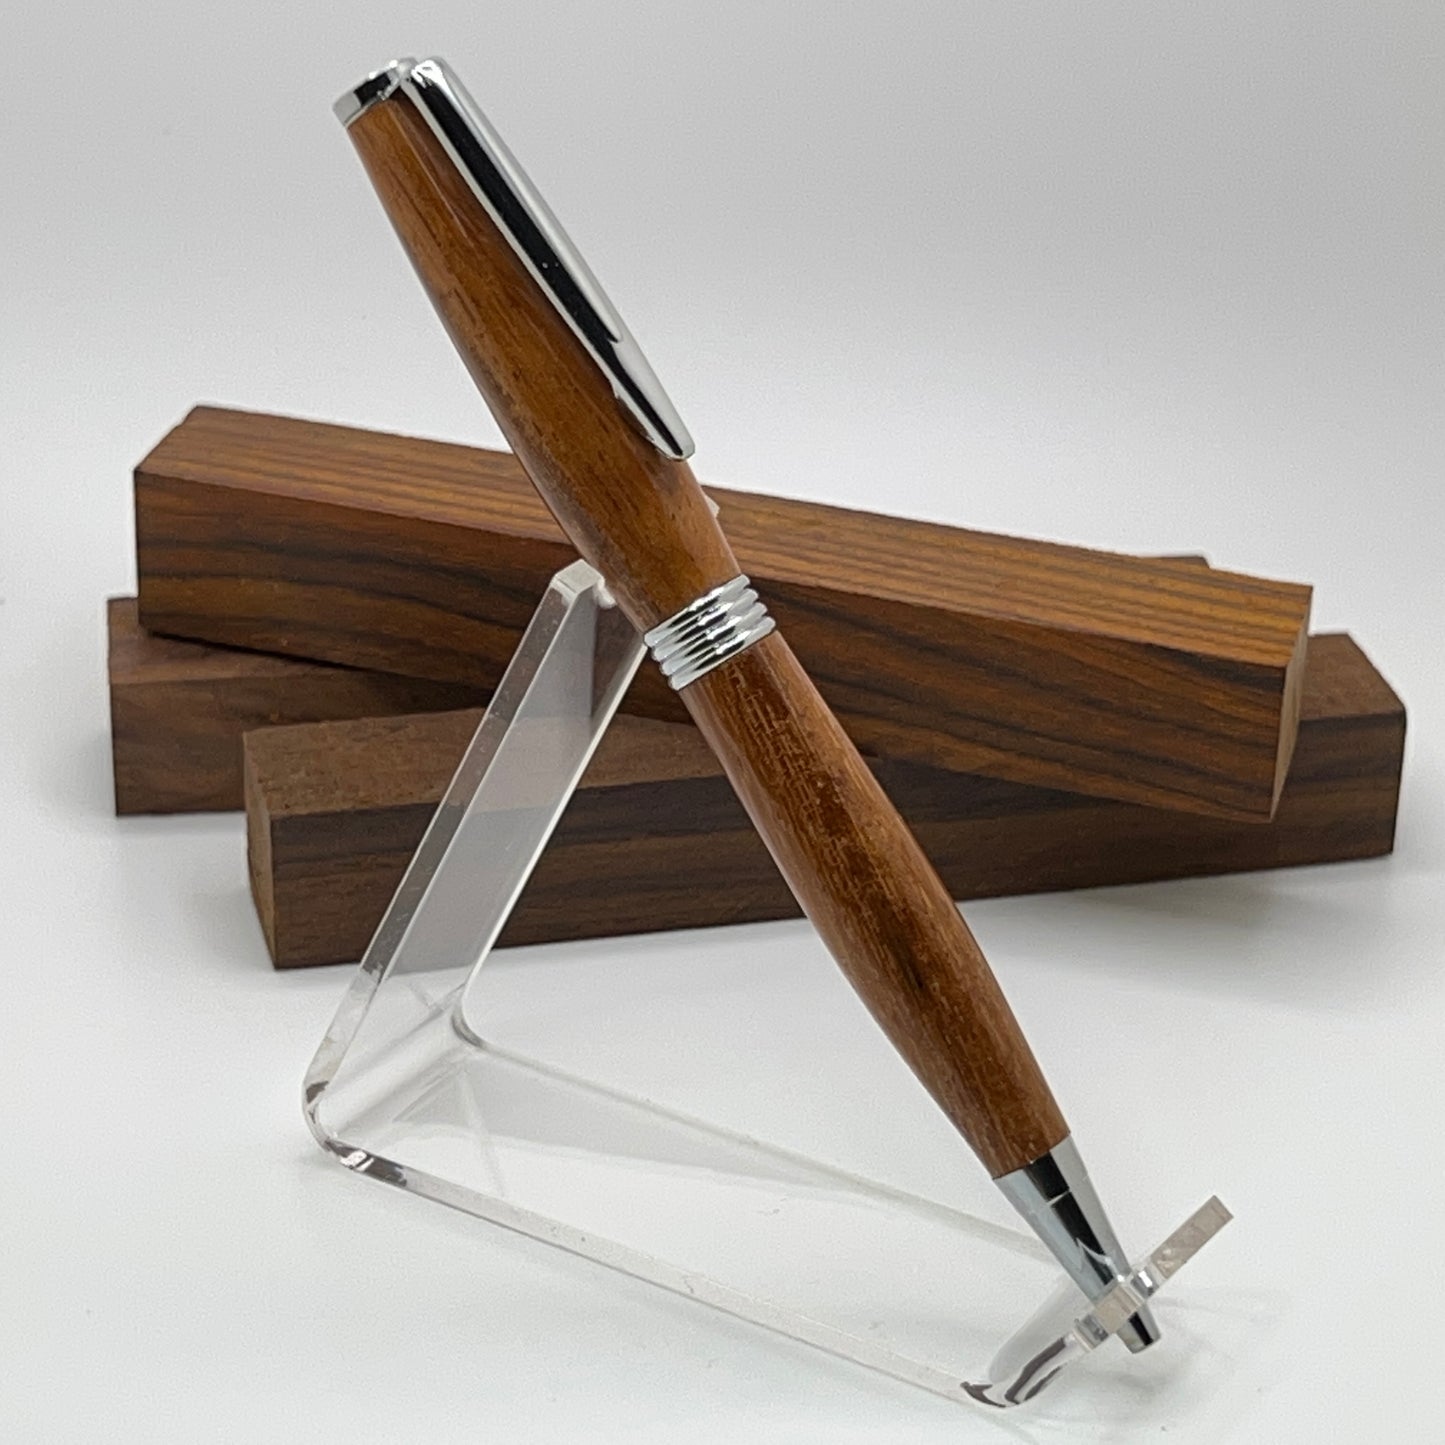 Handcrafted Angelim Pedra Wood pen with chrome hardware